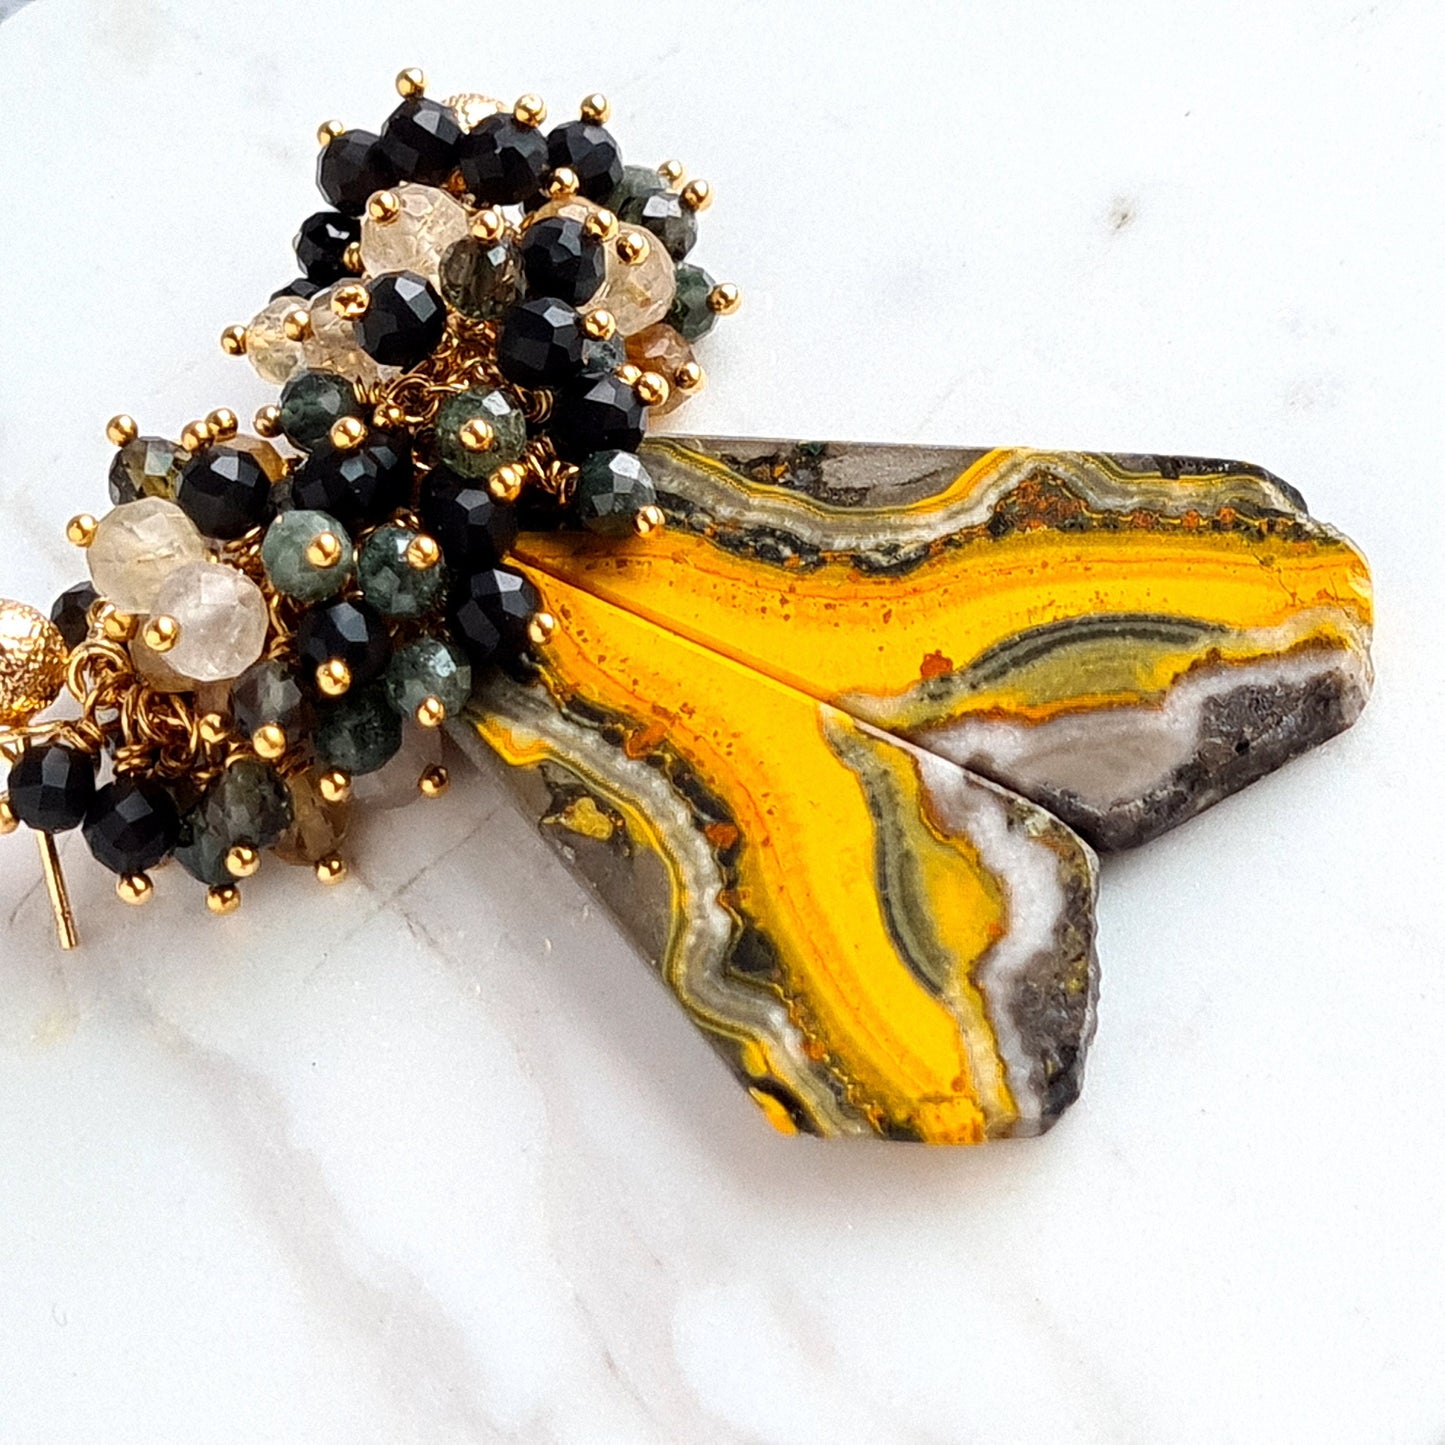 Bumble Bee Jasper with Cluster of Golden Obsidian, Blue Tourmaline, Golden Rutile & Citrine